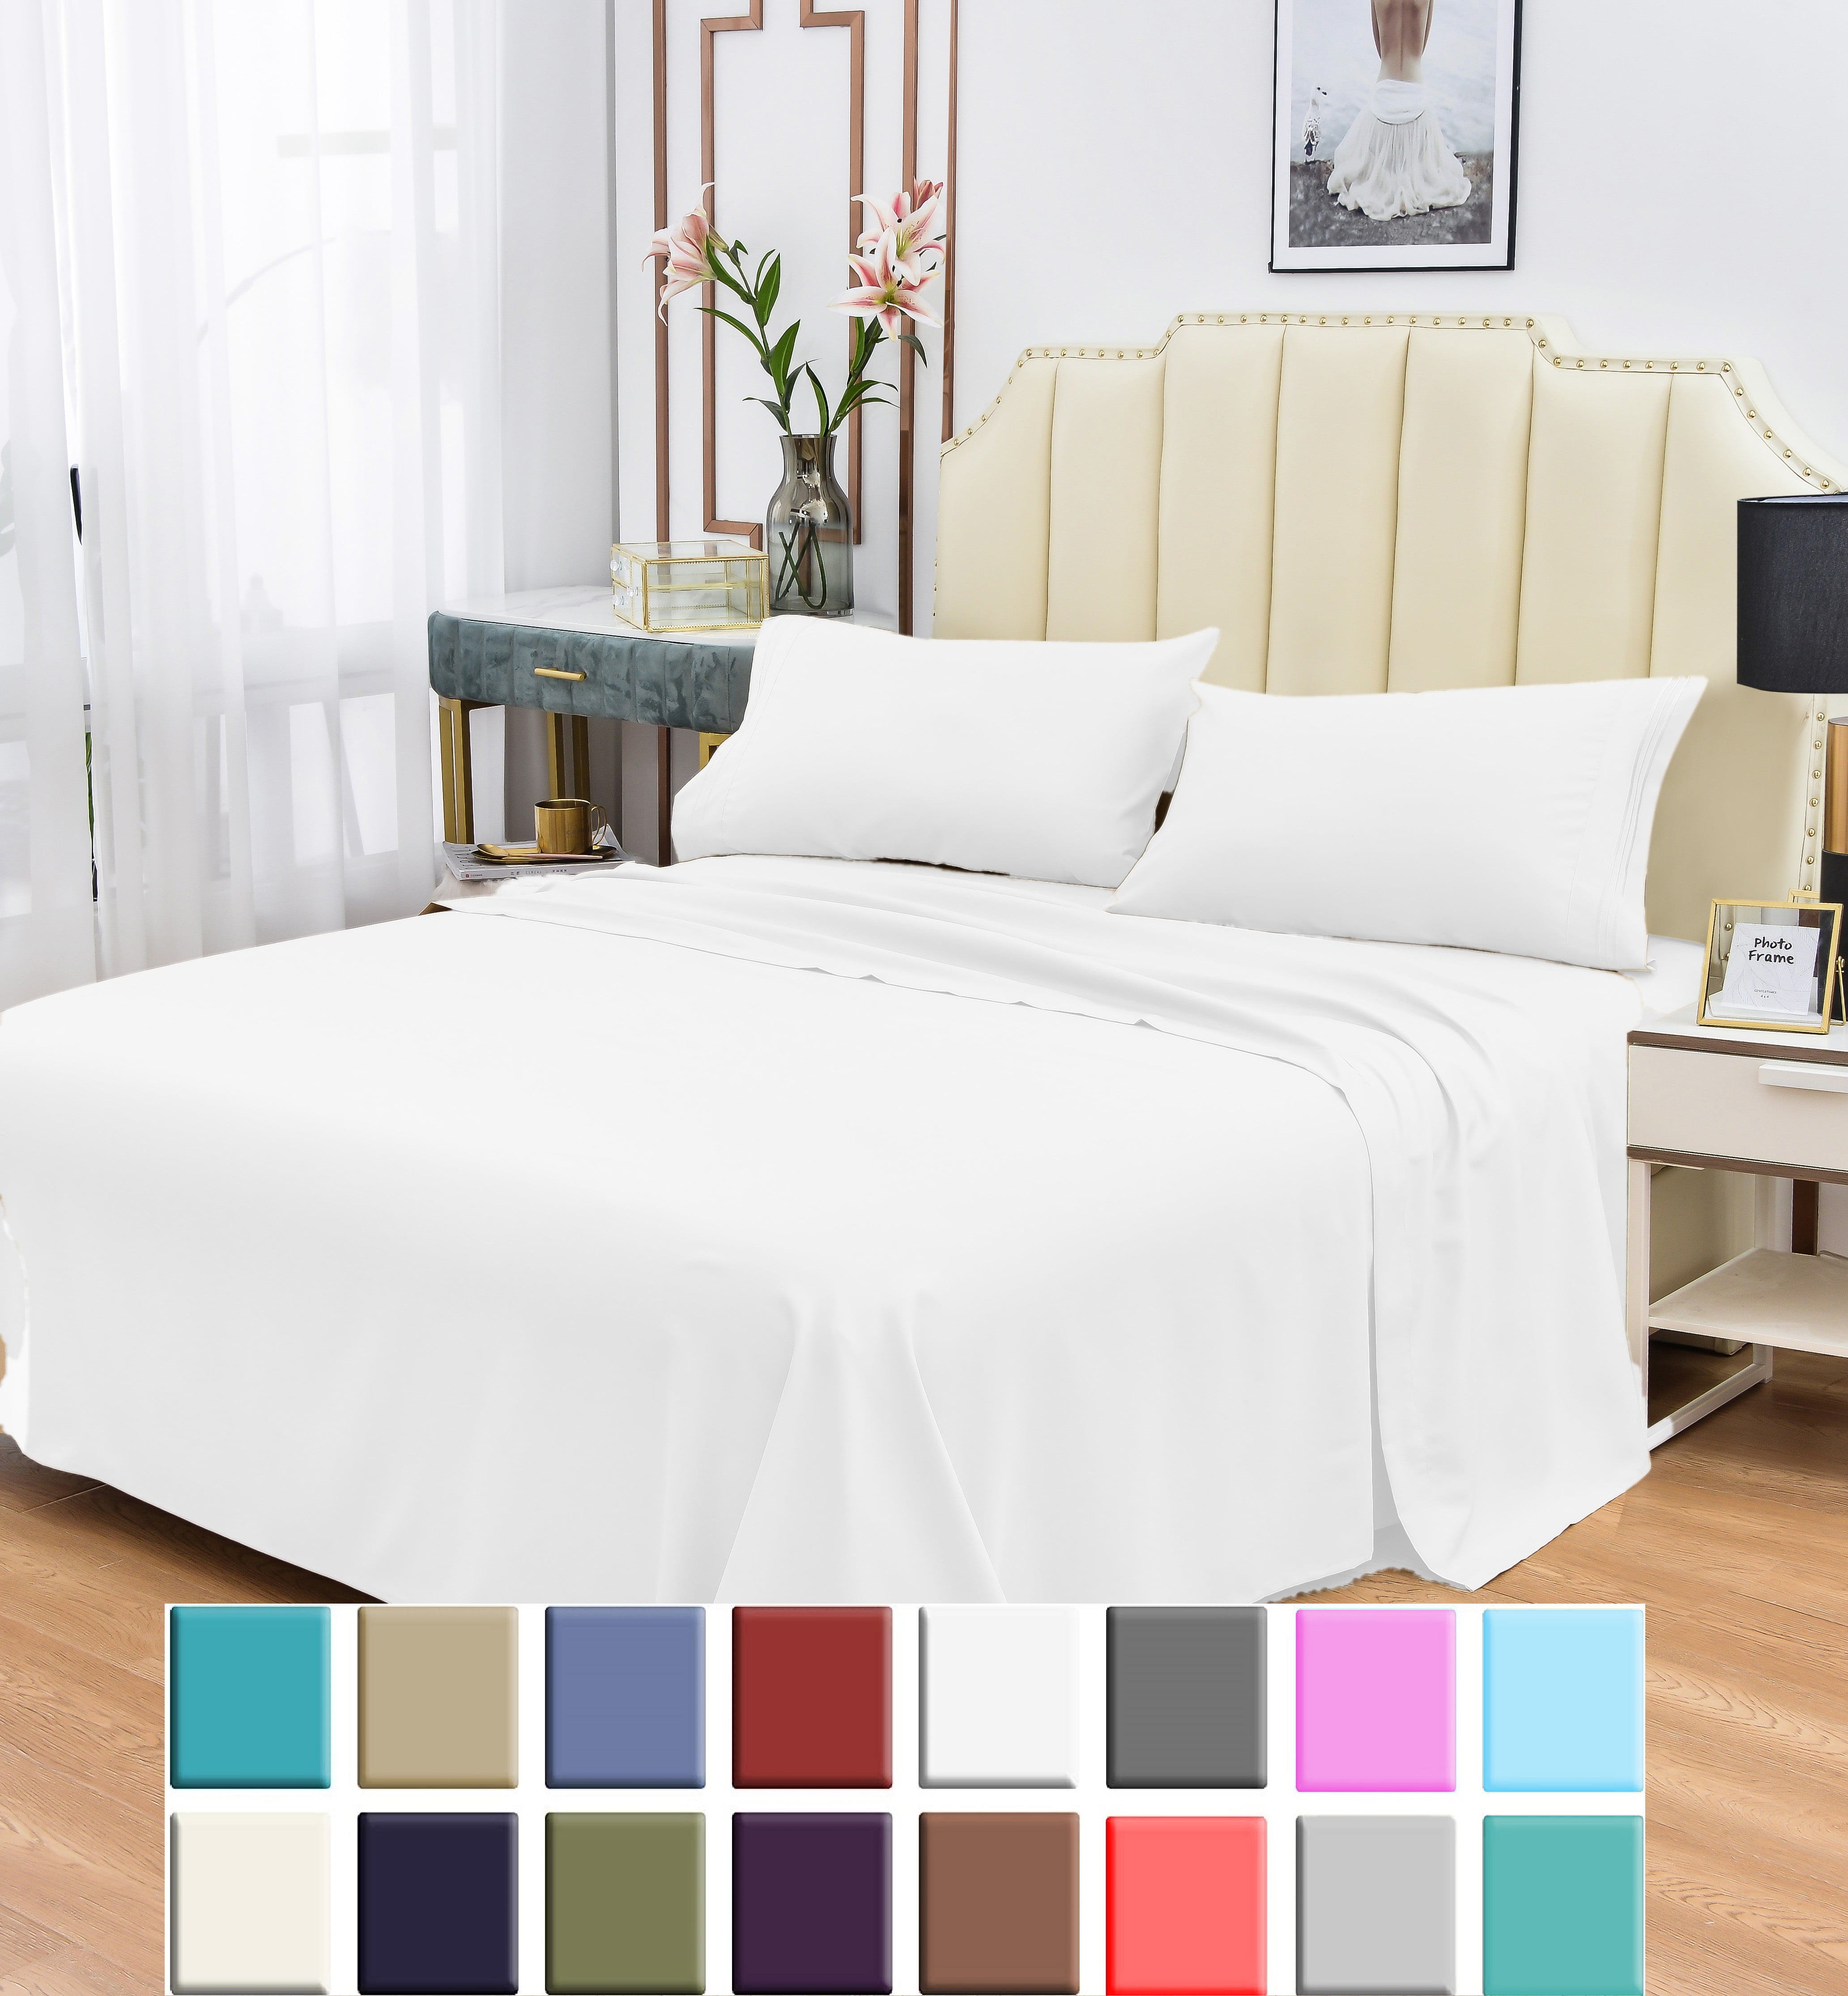 Details about   Home 1 PC Fitted Sheet Extra Deep Pocket Egyptian Cotton Solid Colors US Full